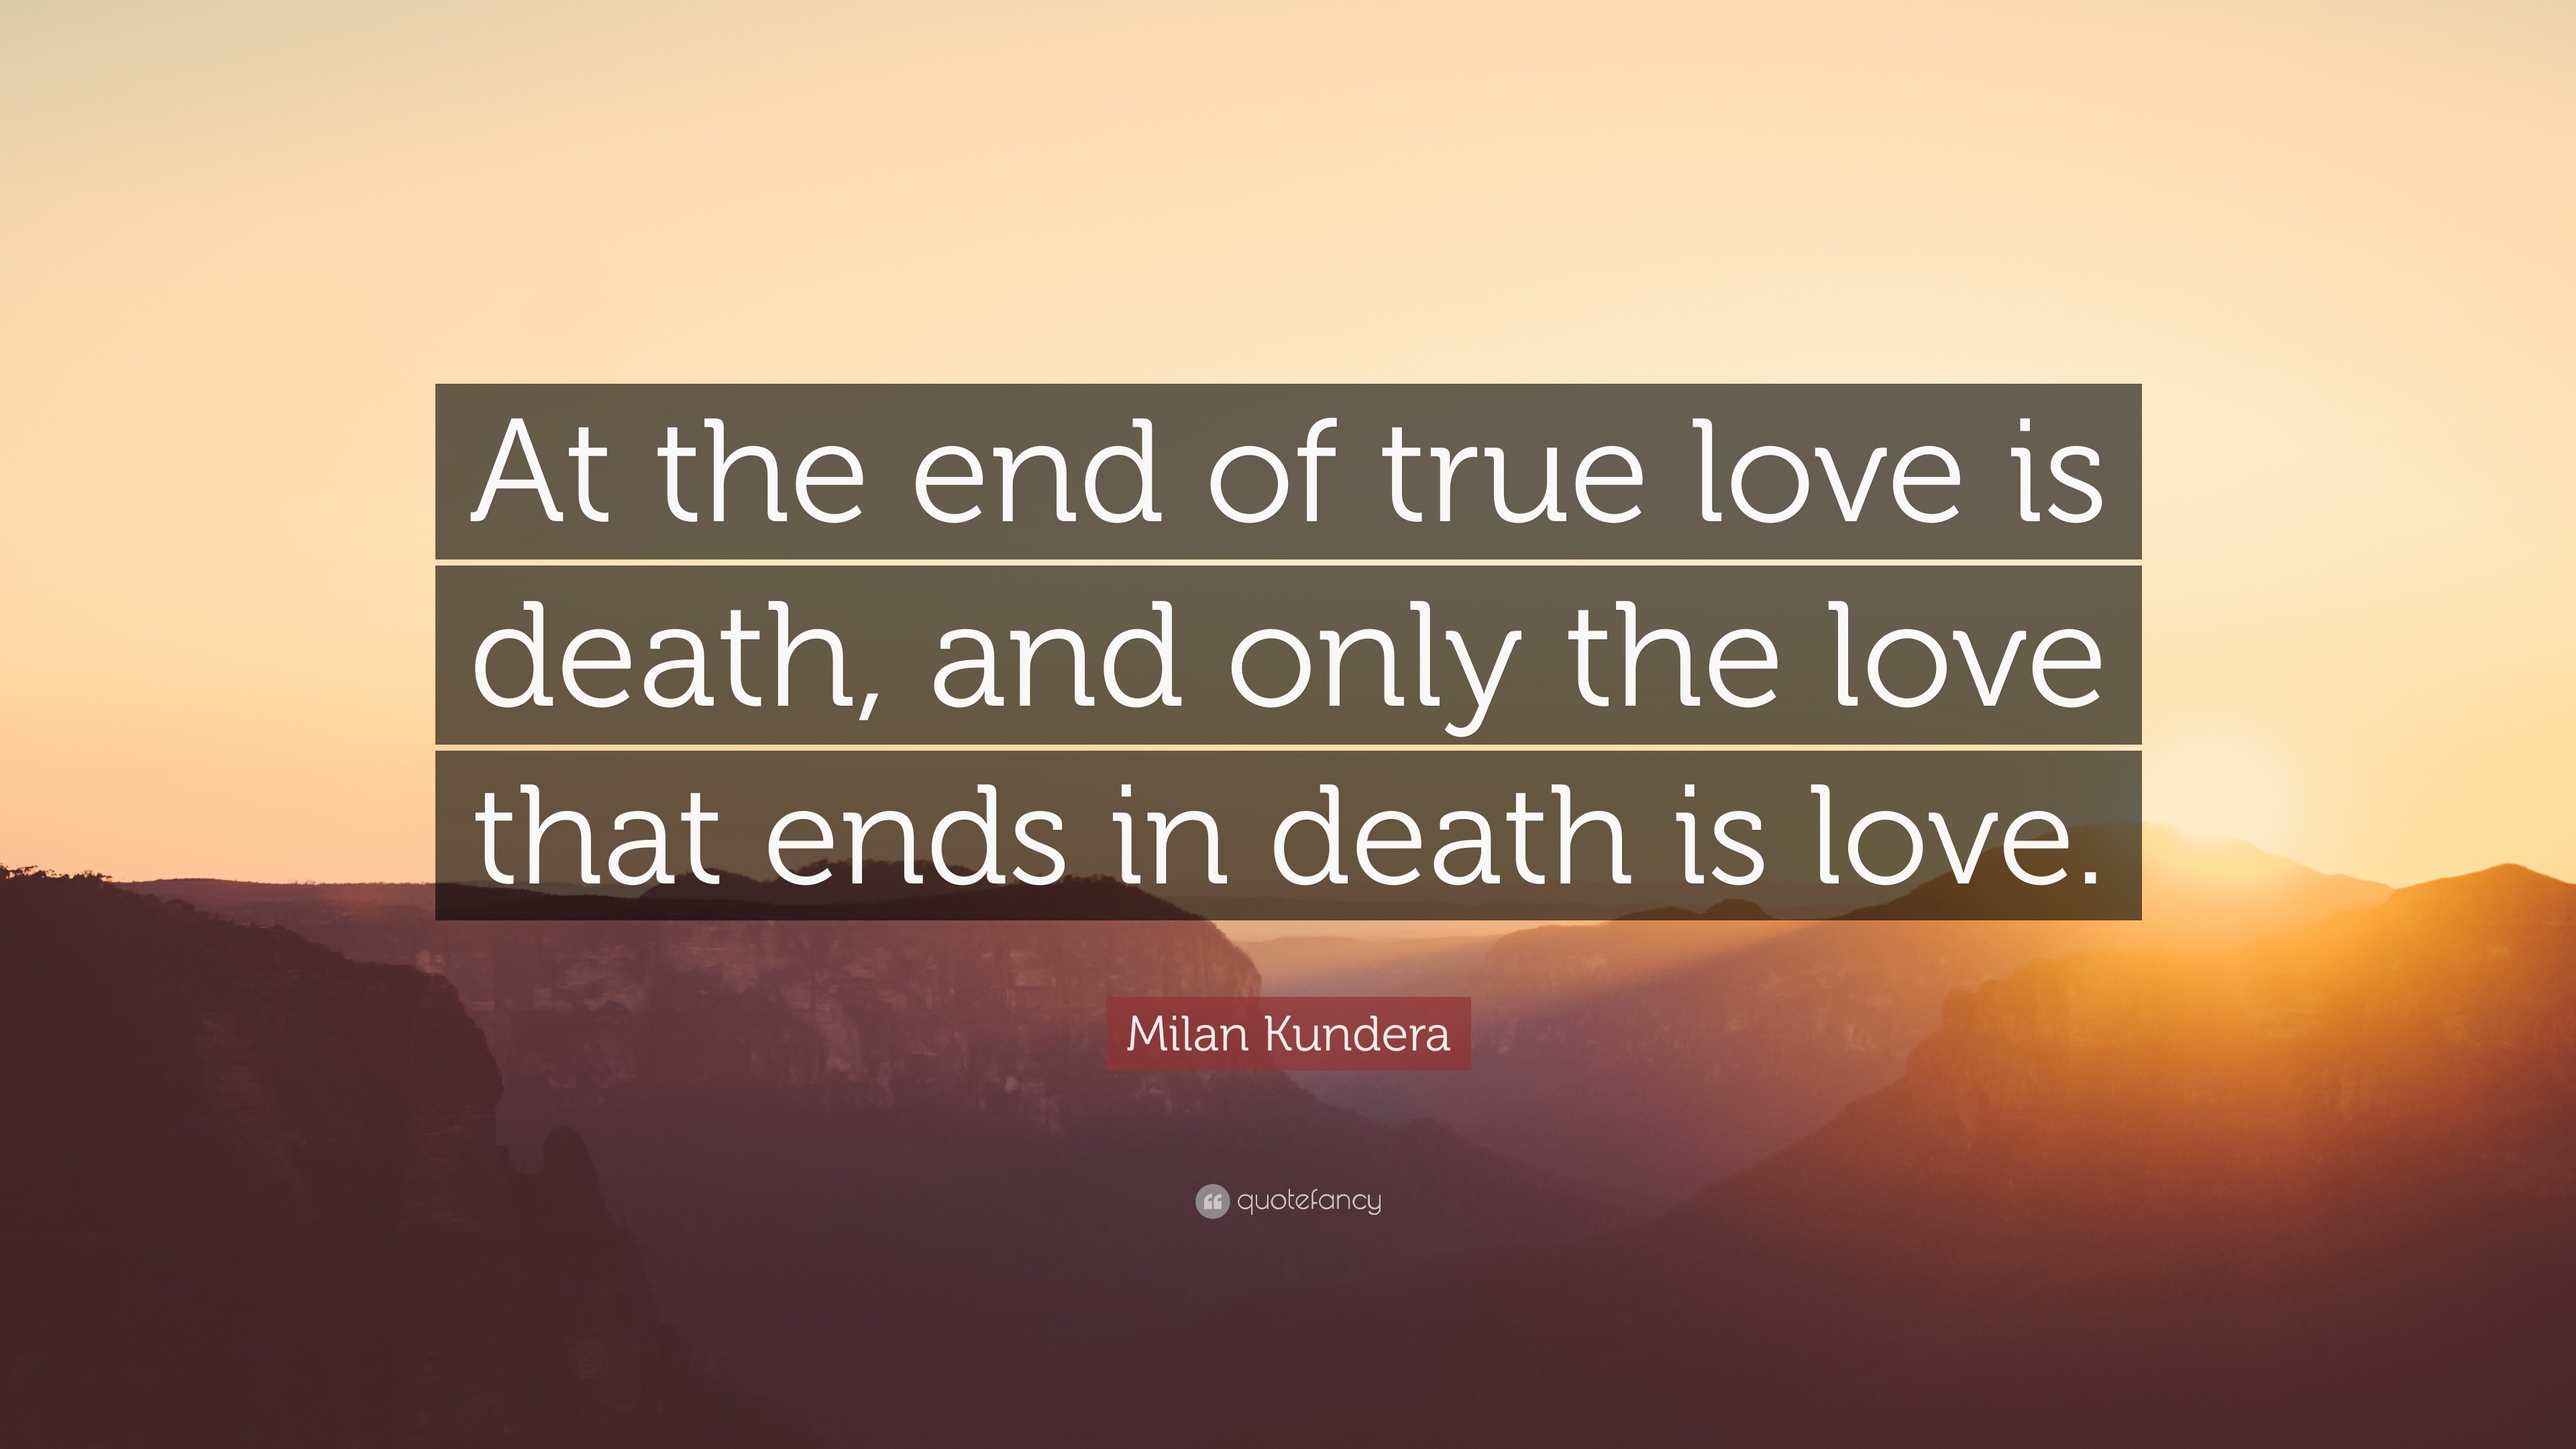 3840x2160 Milan Kundera Quote: “At the end of true love is death, and only